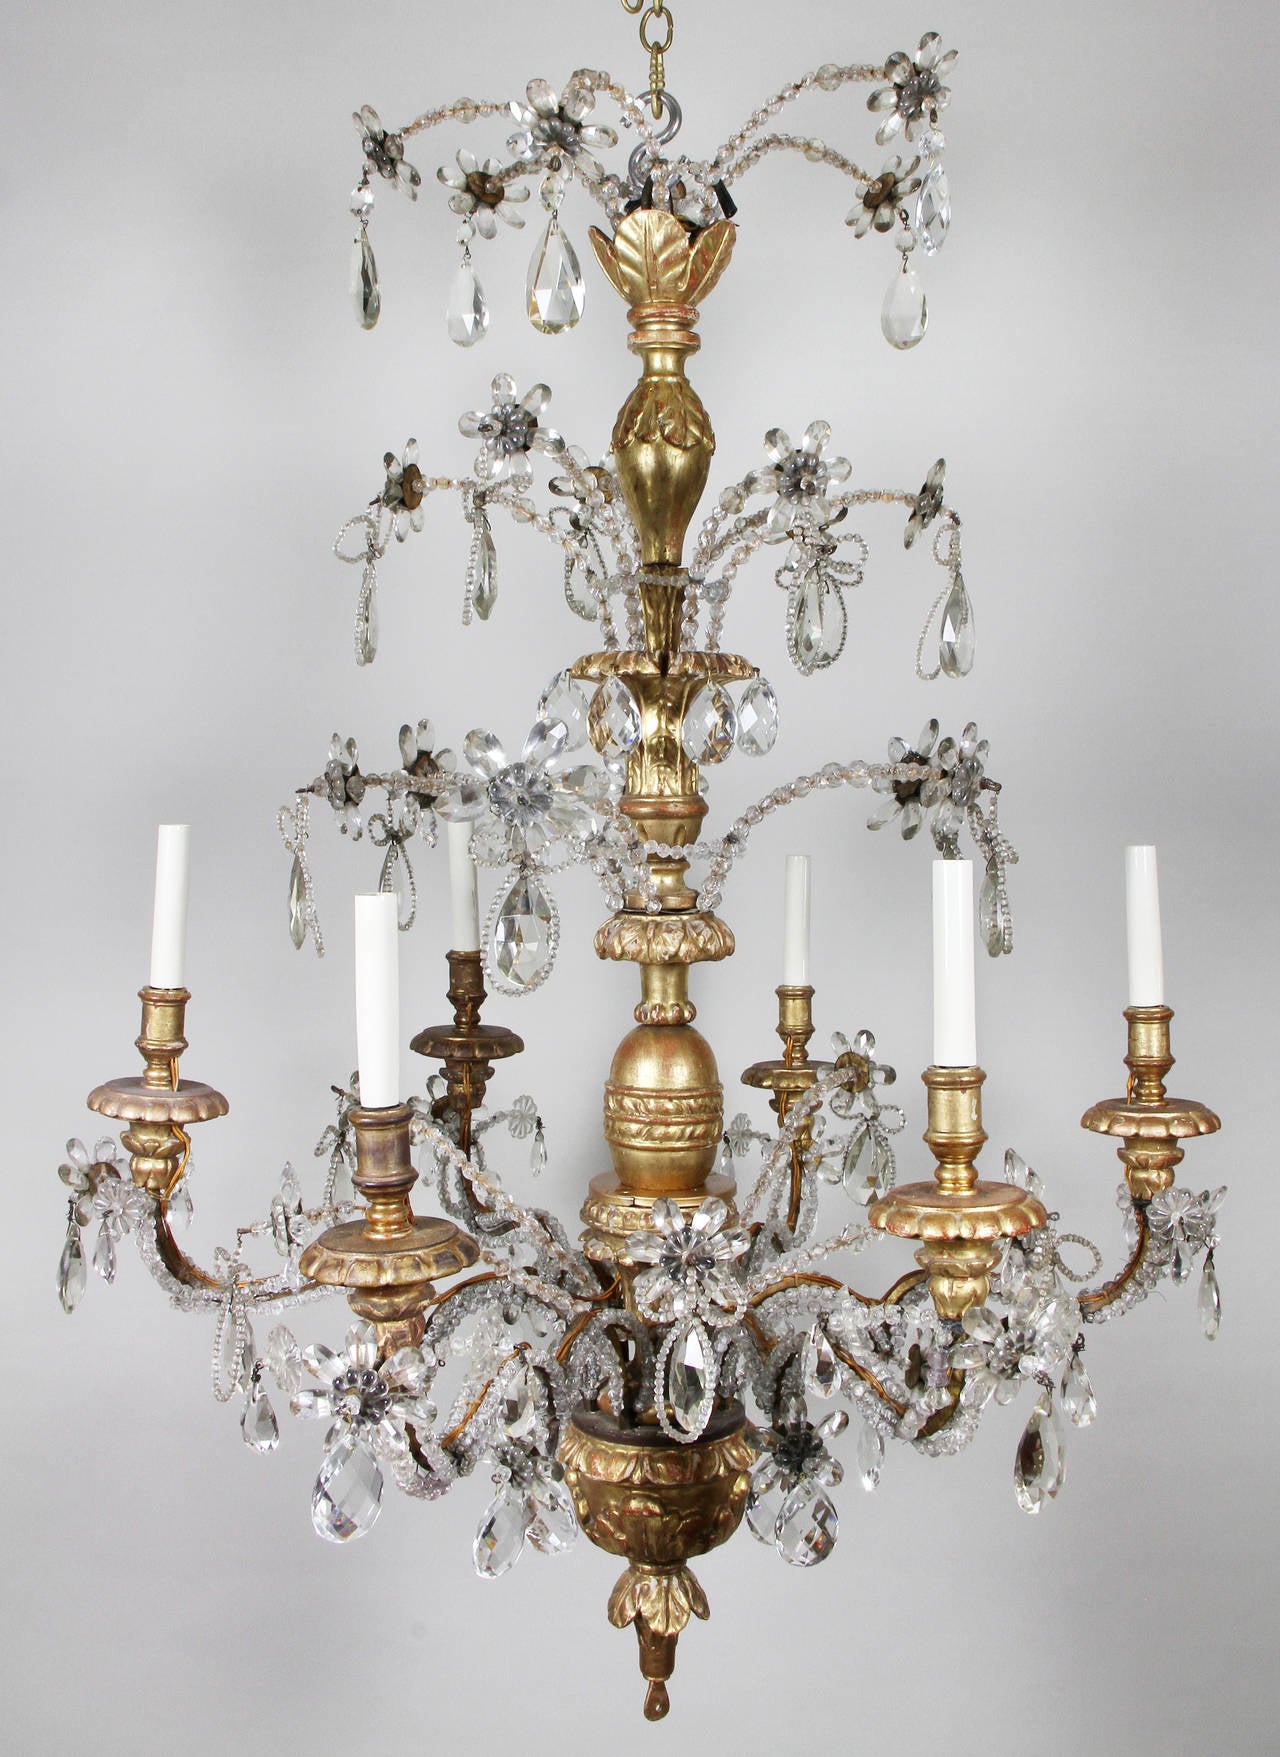 Carved giltwood central post with three-tiers of beaded stems terminating with flower heads over six giltwood candle arms with trailing beads and drops.